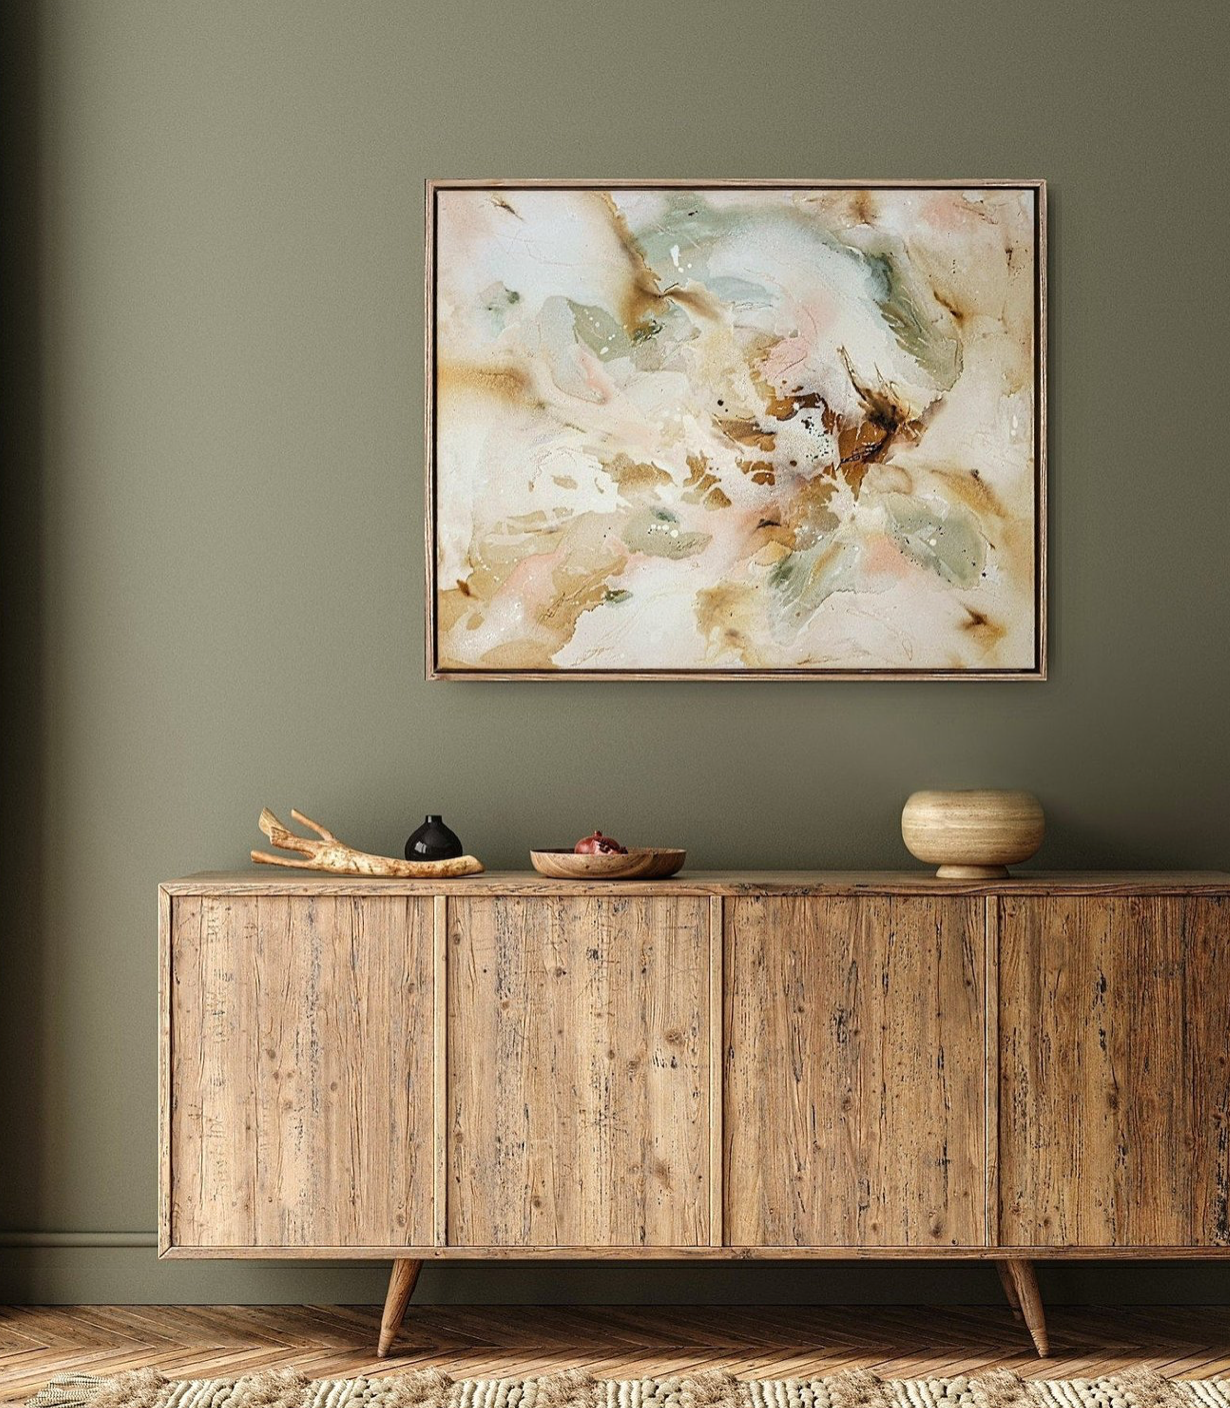 Abstract neutral coloured artwork pictured in a living room